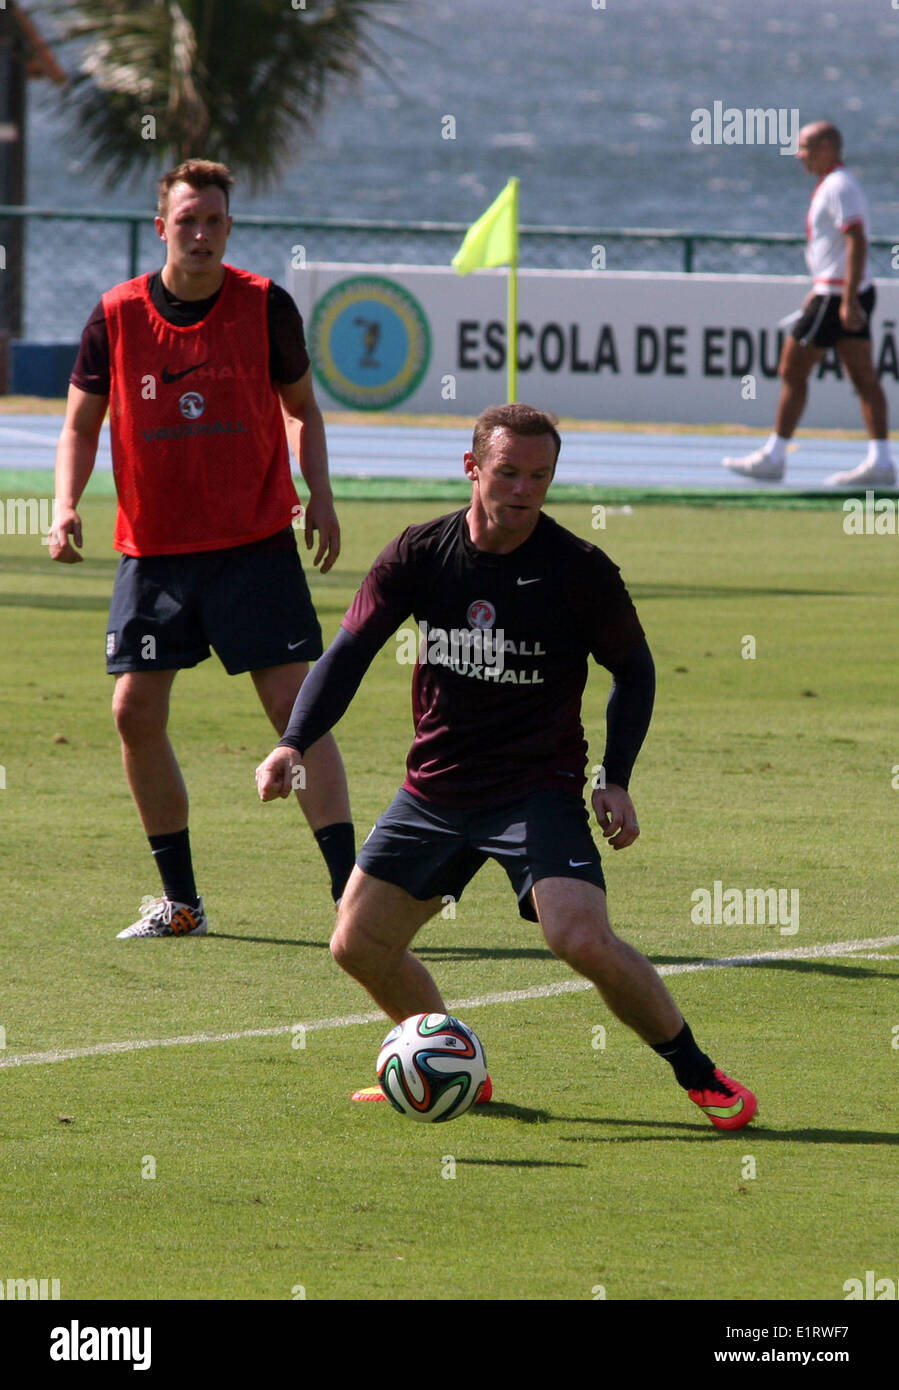 Rio de Janeiro, Brazil. 09th June, 2014. Wayne Rooney (R) and Phil Jones of England in action during a training session of the English national soccer team in Rio de Janeiro, Brazil, 09 June 2014. The FIFA World Cup will take place in Brazil from 12 June to 13 July 2014. Photo: Florian Luetticke/dpa/Alamy Live News Stock Photo